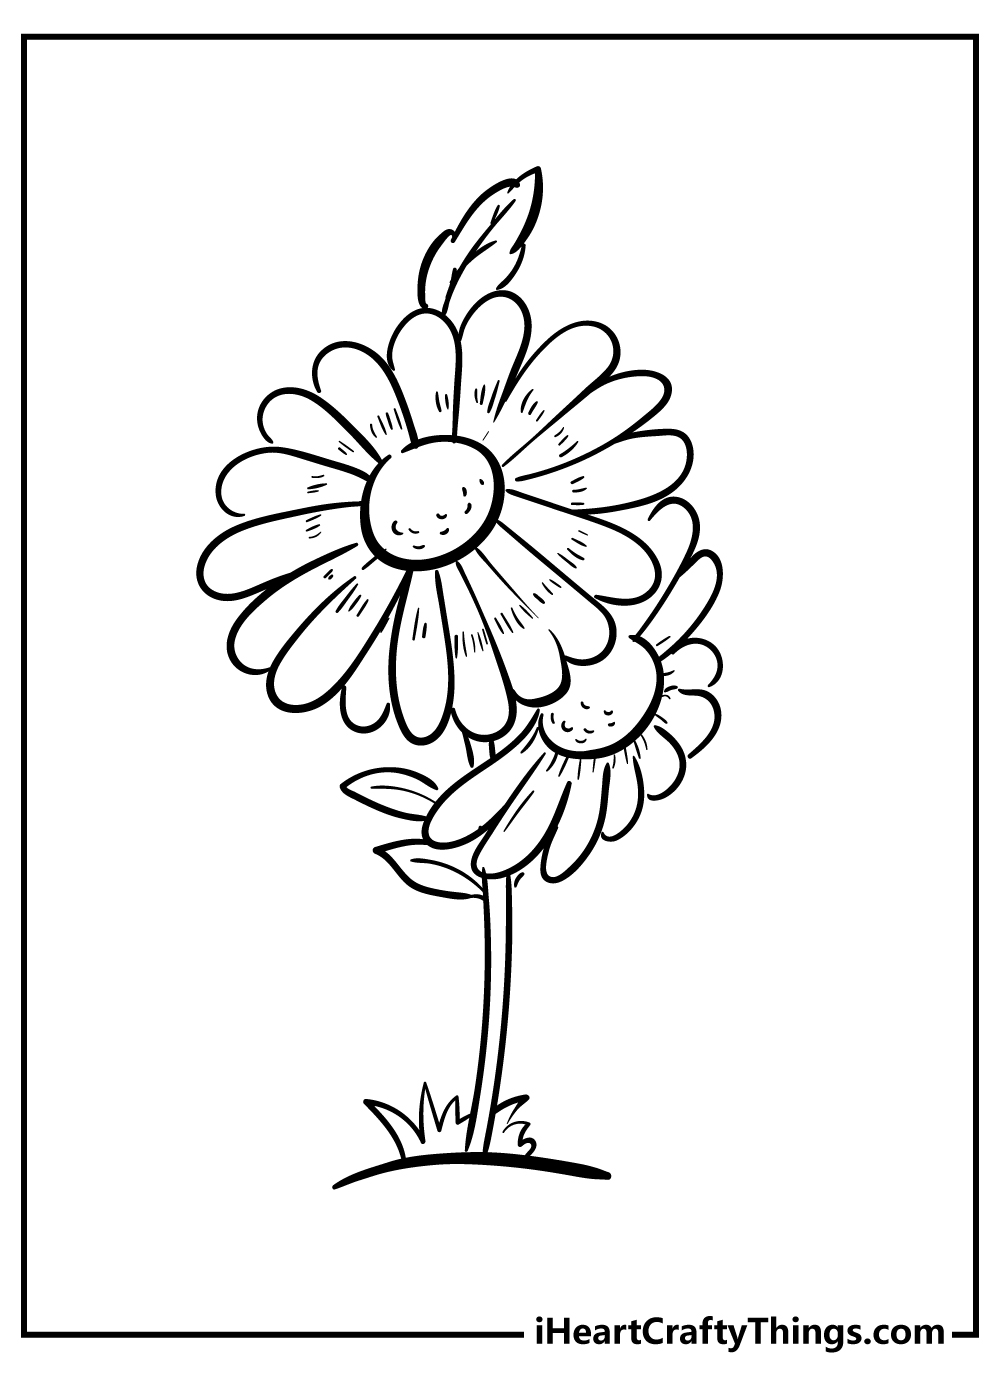 Daisy Coloring Sheet for children free download